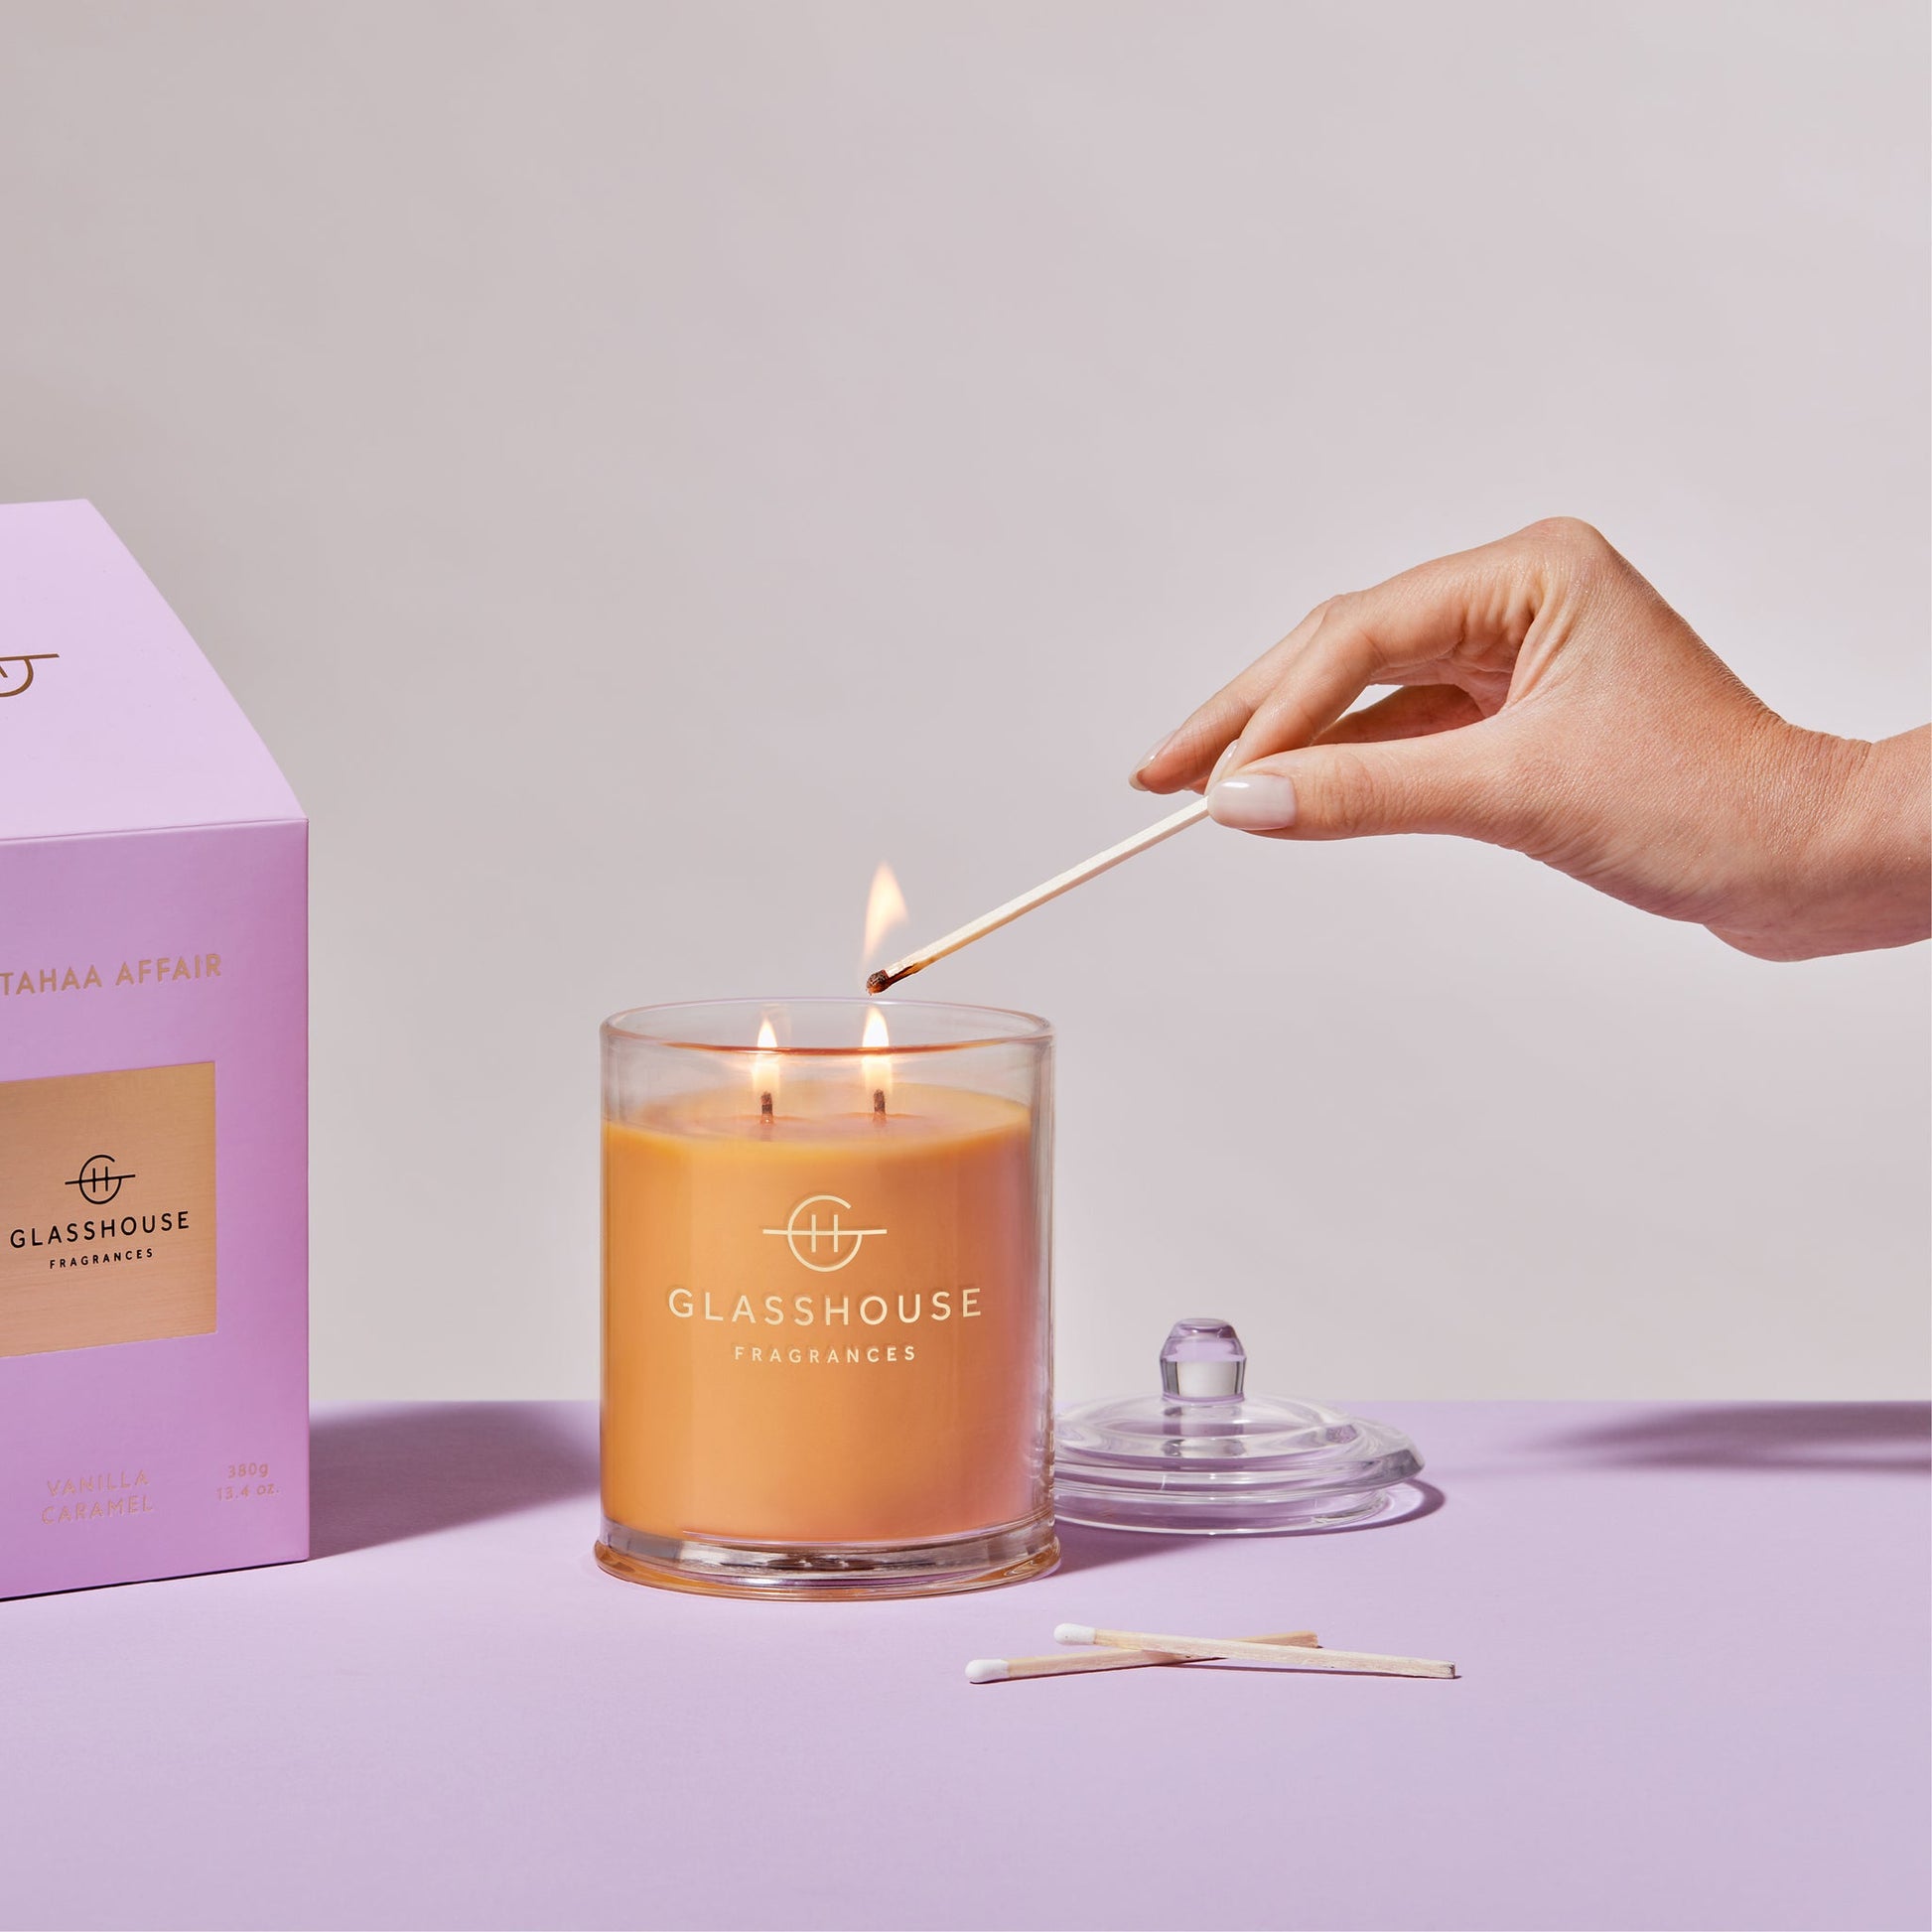 a womans hand lighting the A Tahaa Affair Triple Scented Candle while displayed next to the pink box